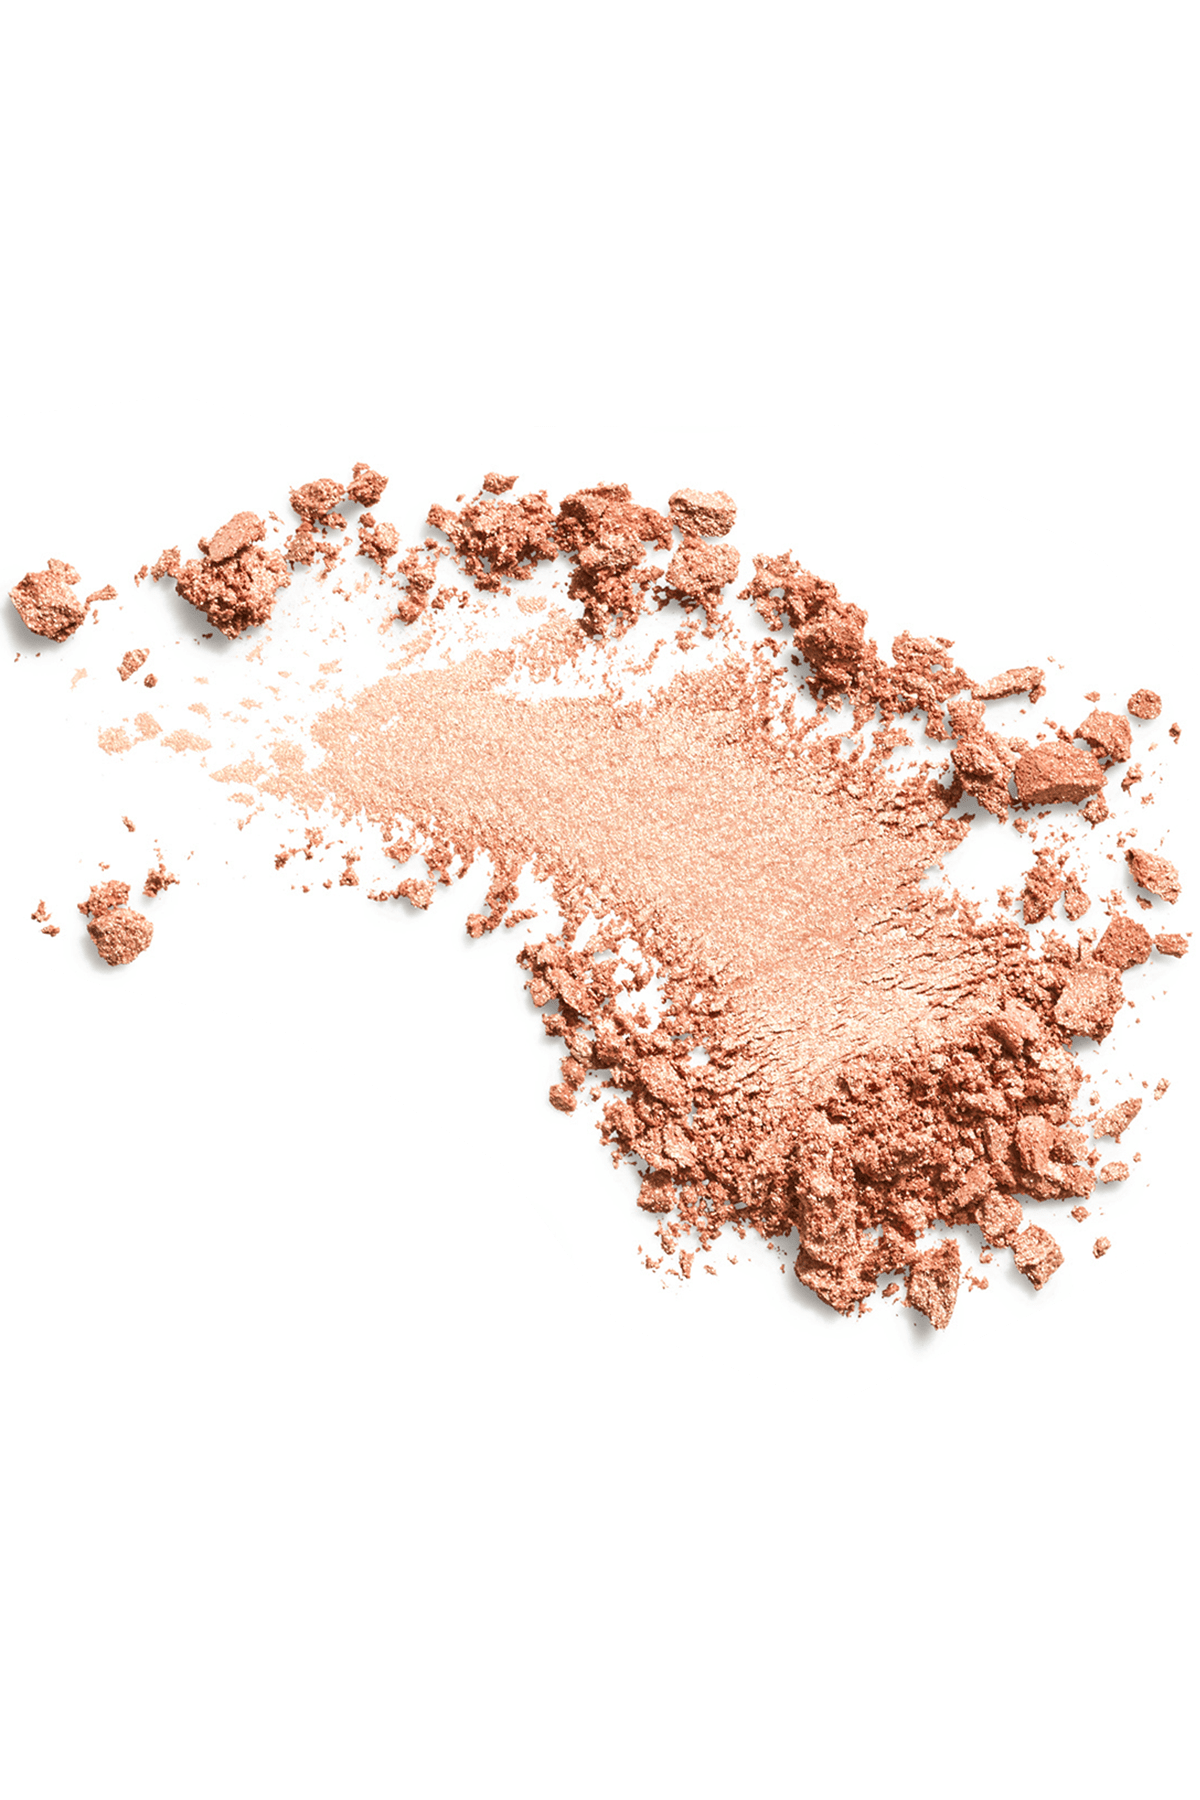 TOPFACE Baked Choice Rich Touch Highlighter